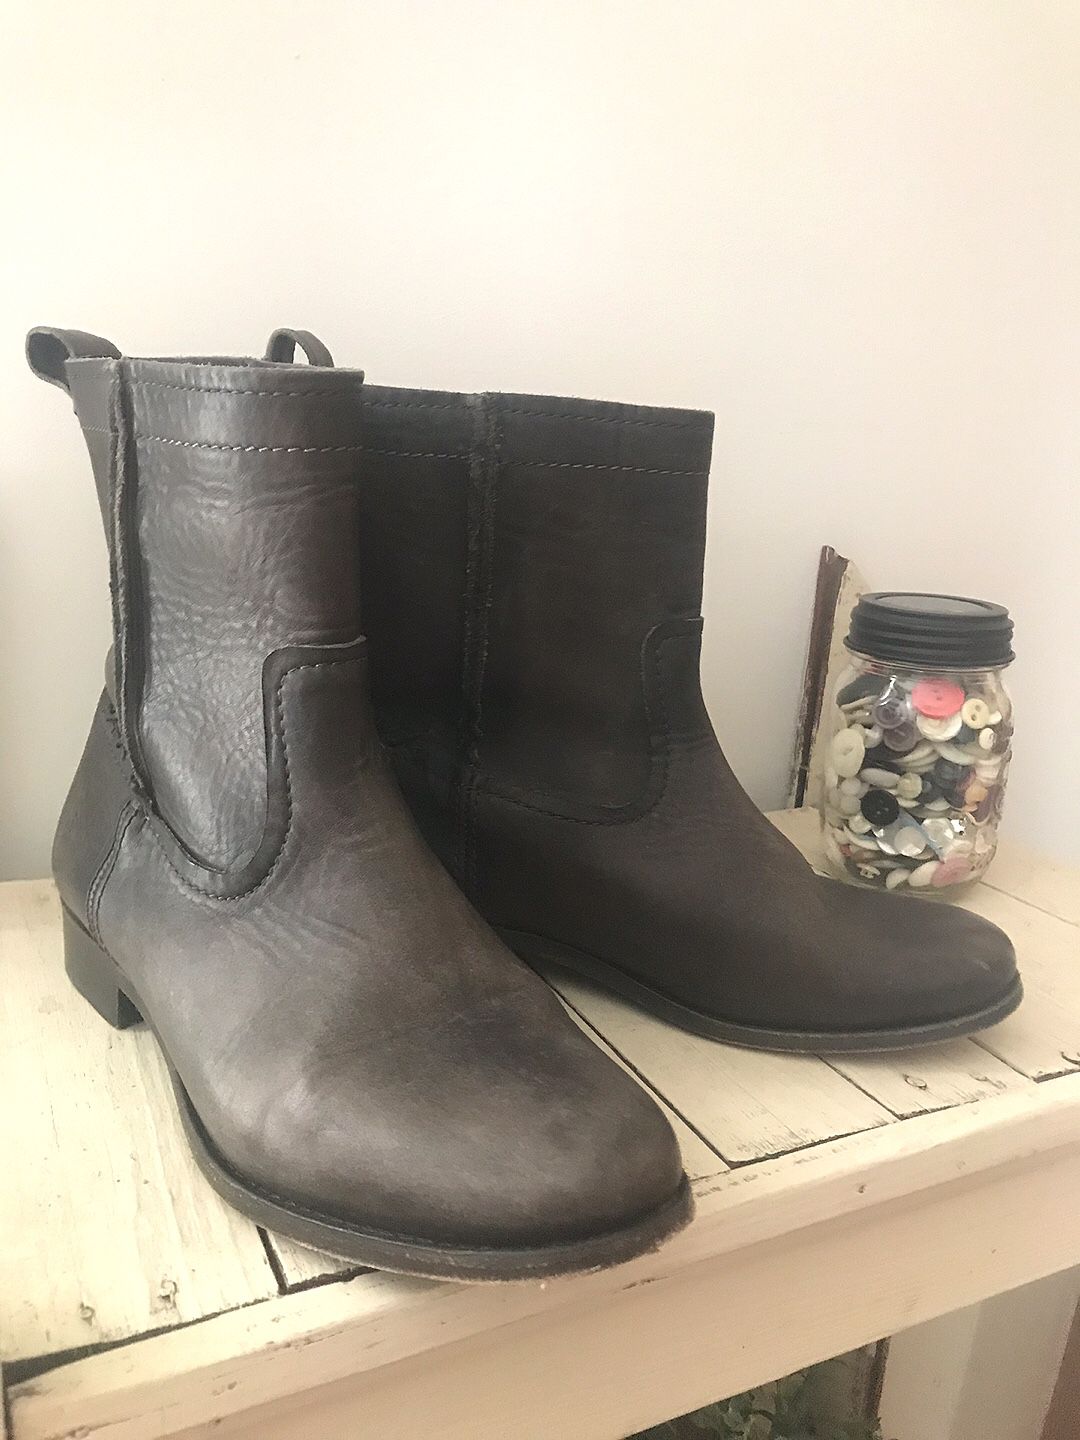 Women’s FRYE leather boots